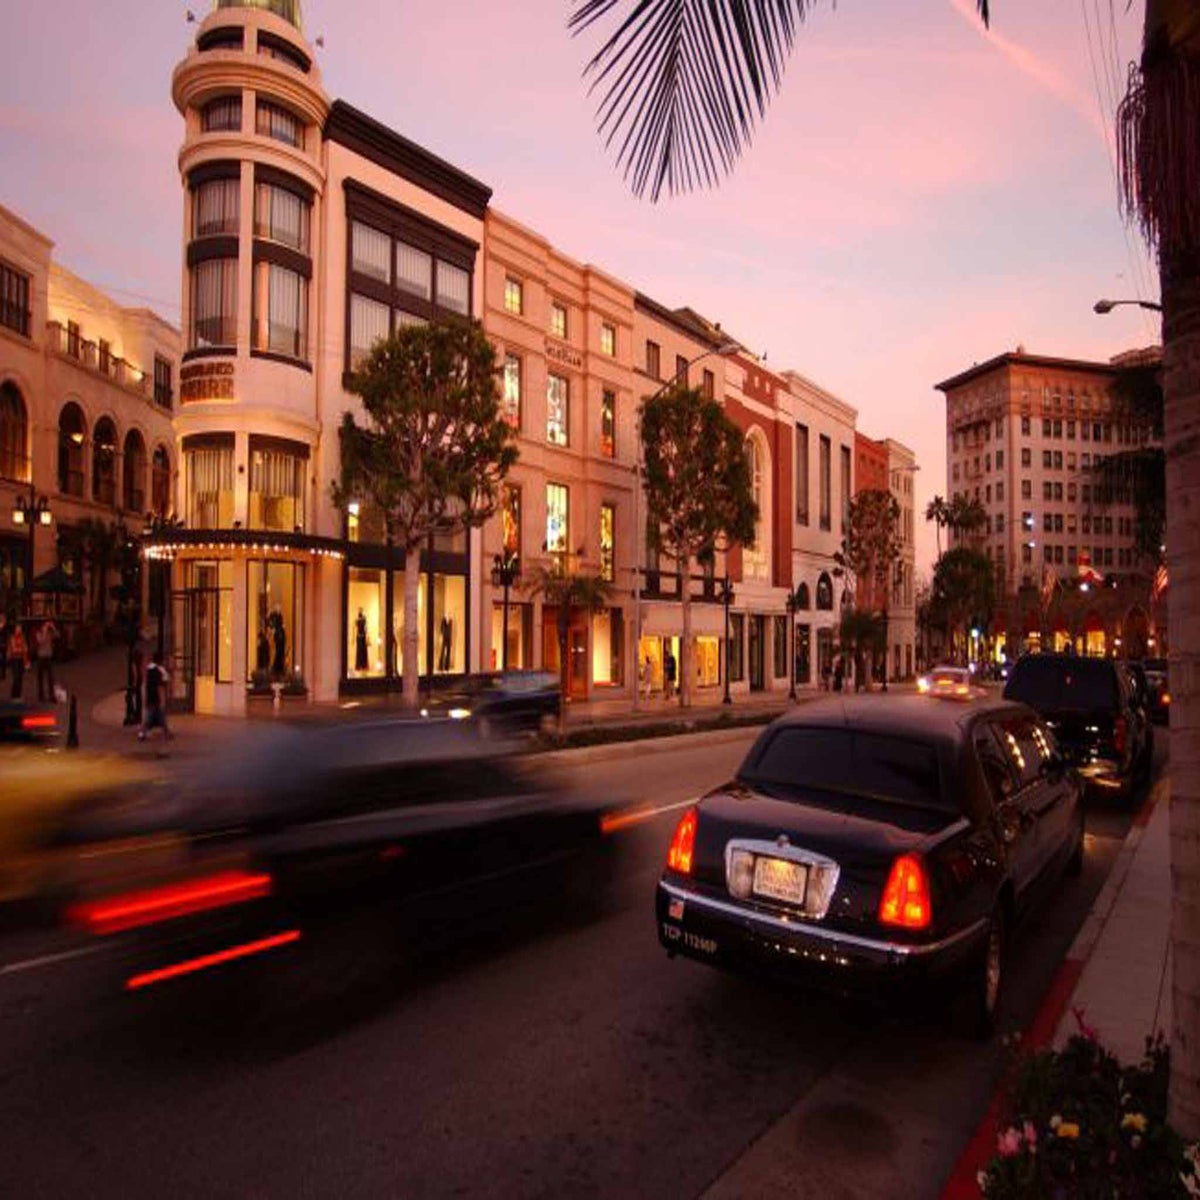 712 Rodeo Drive Sign Stock Photos, High-Res Pictures, and Images - Getty  Images